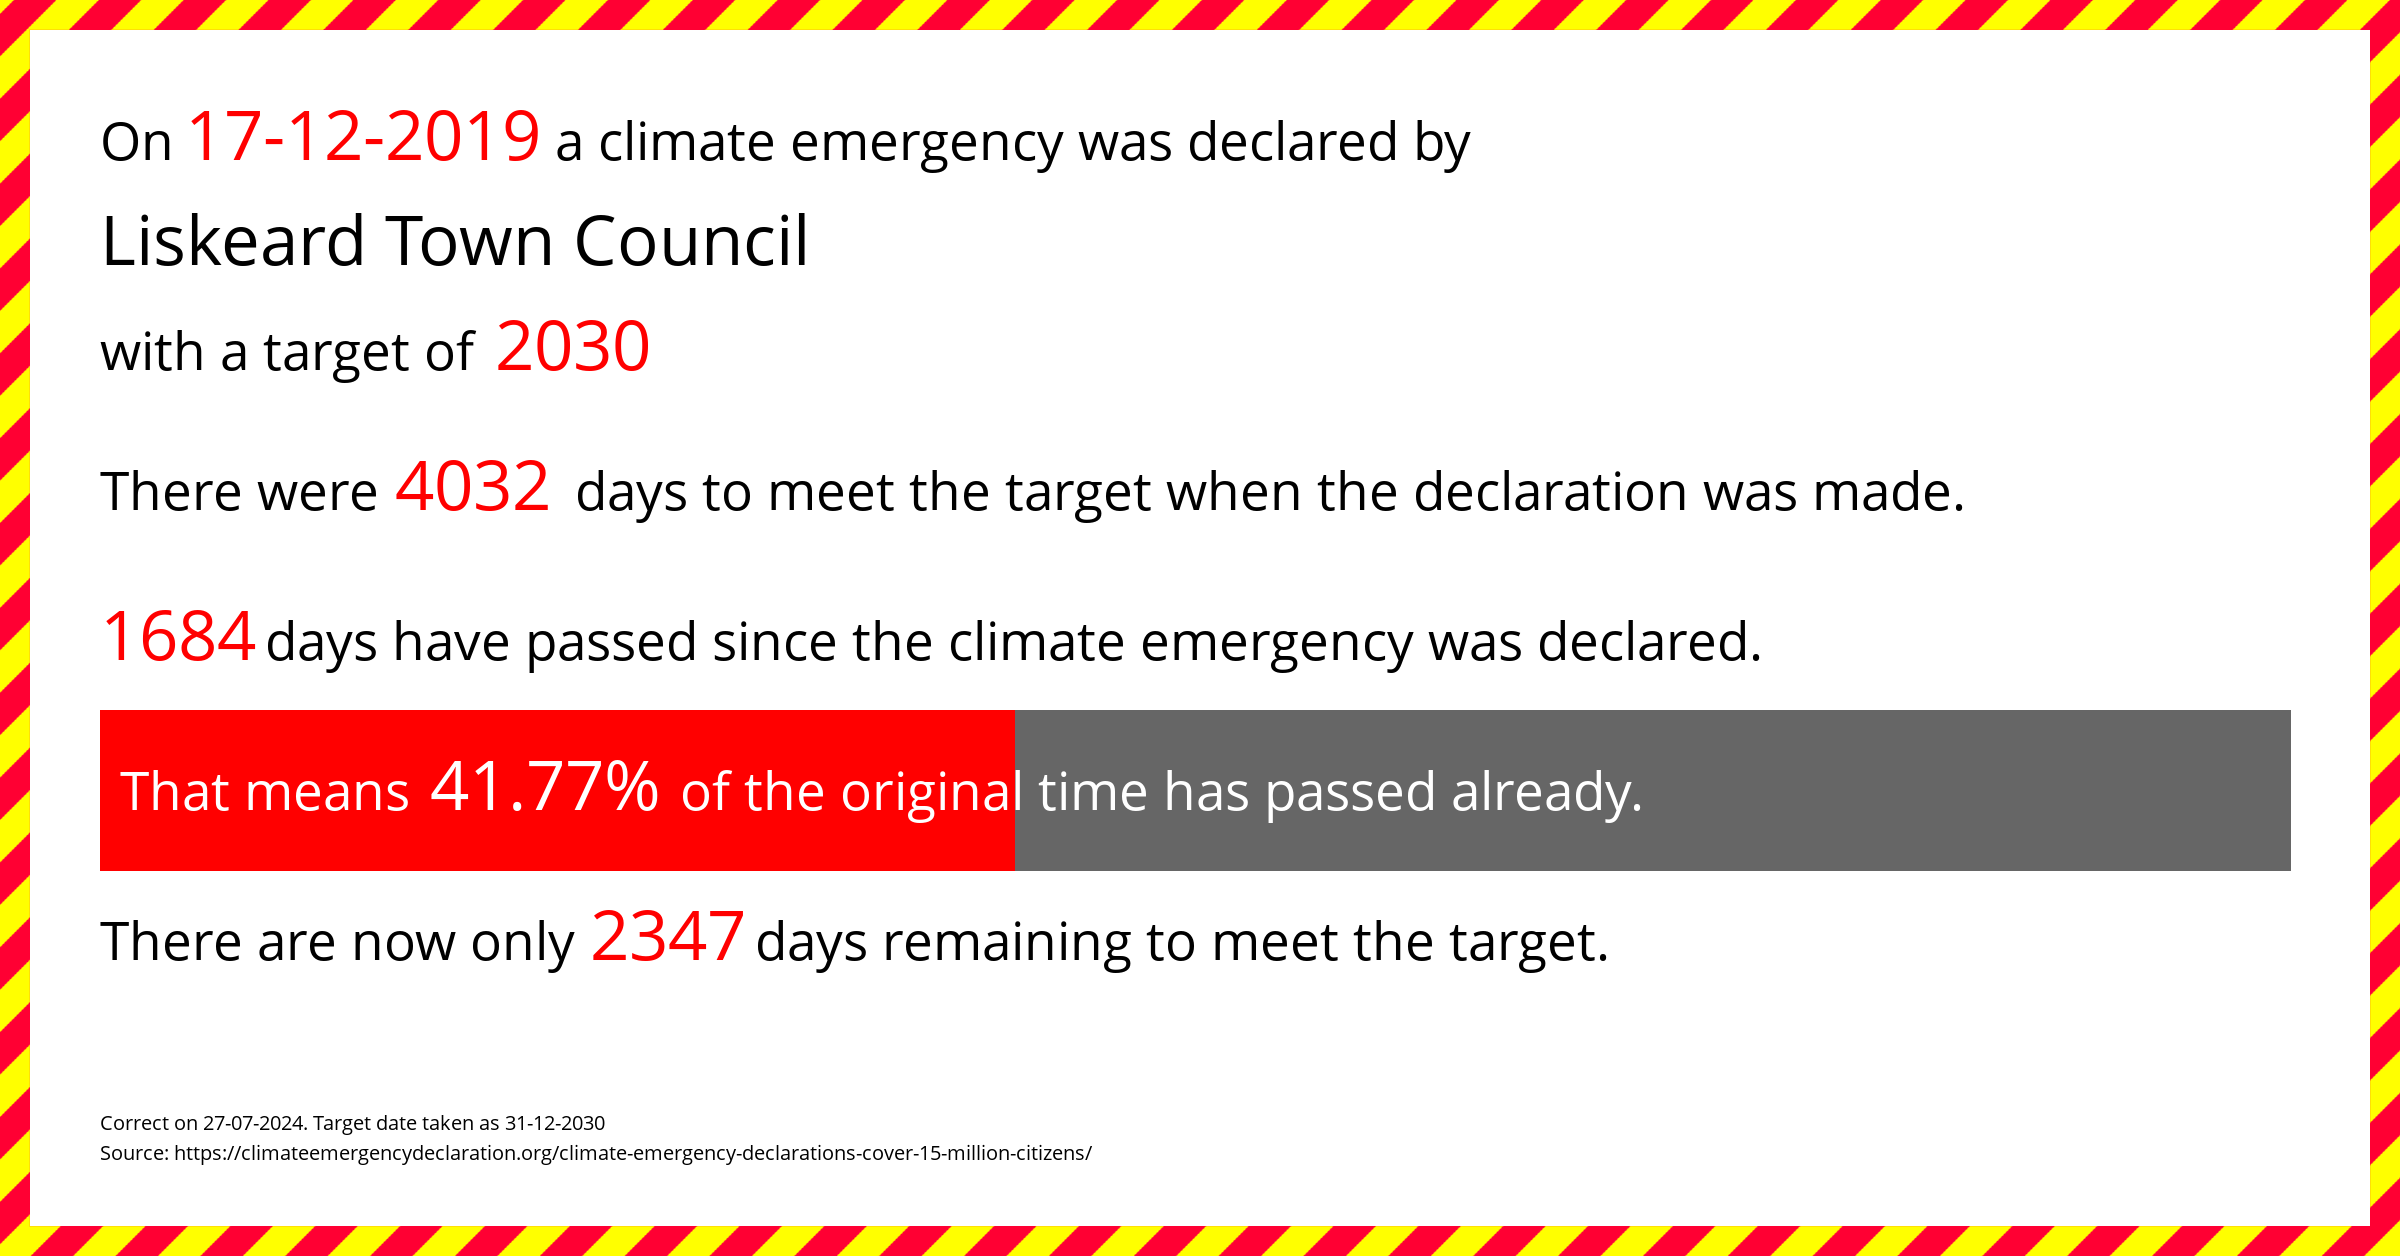 Liskeard Town Council  declared a Climate emergency on Tuesday 17th December 2019, with a target of 2030.